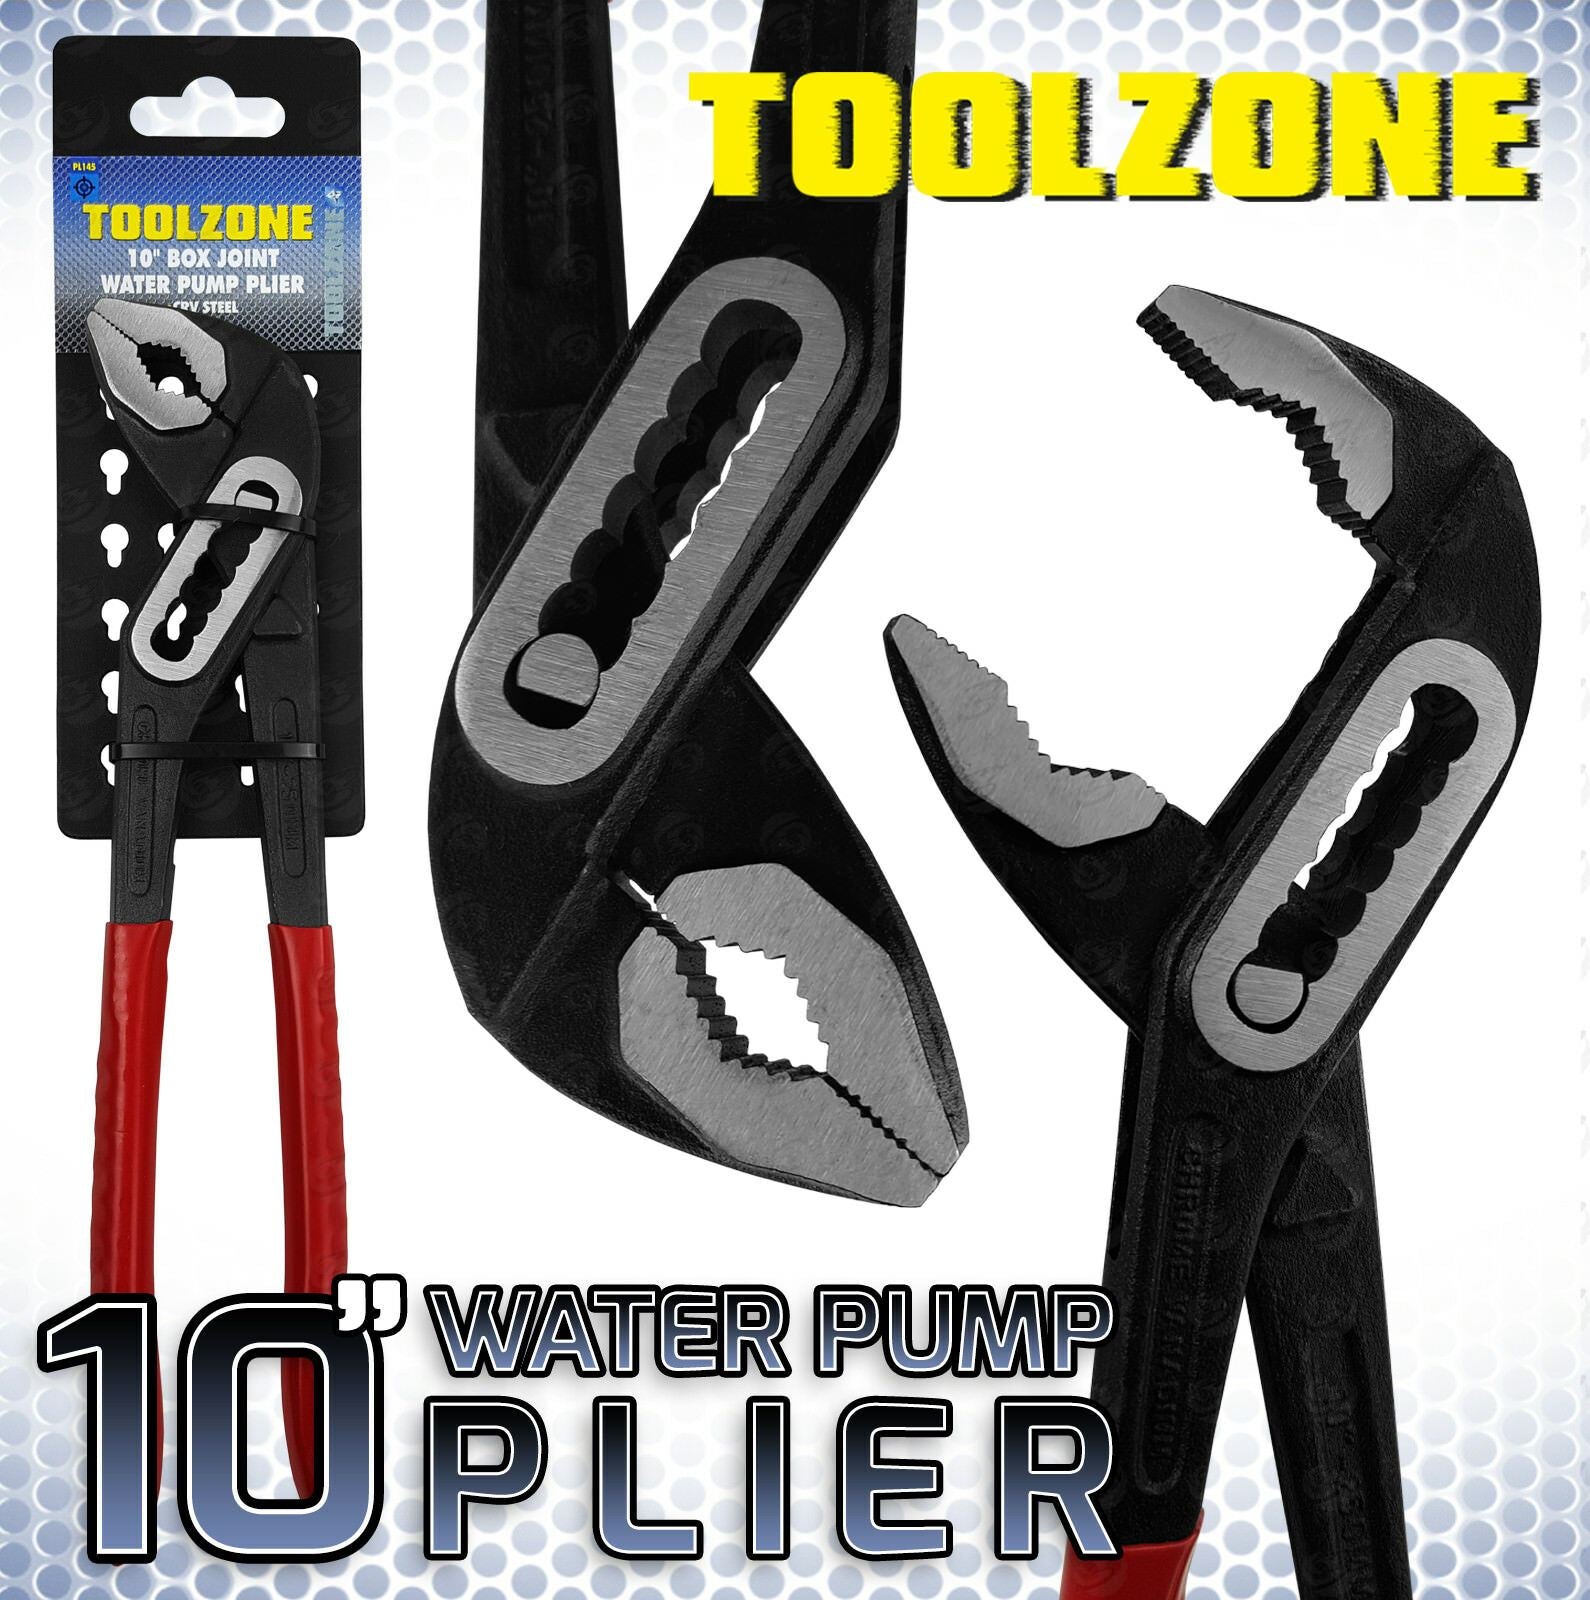 TOOLZONE 10" BOX JOINT WATER PUMP PLIERS